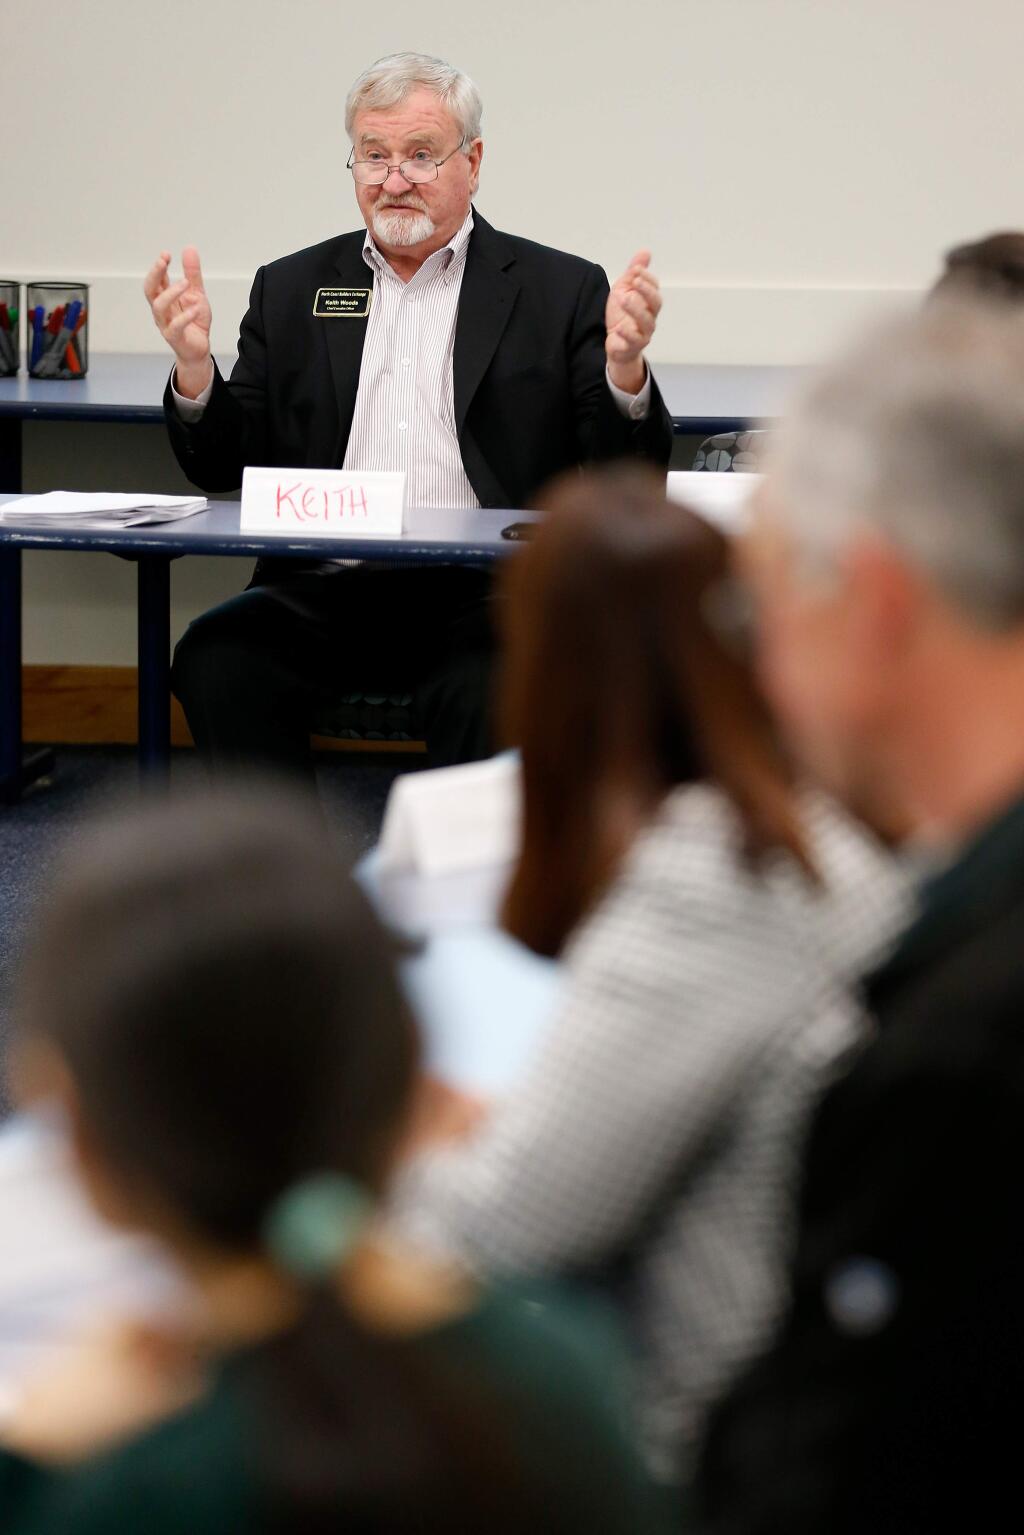 Guest speaker Keith Woods, CEO of North Coast Builders Exchange, gives a presentation during a block captains meeting at the Sonoma County Administration Center in Santa Rosa, California, on Thursday, January 24, 2019. (Alvin Jornada / The Press Democrat)